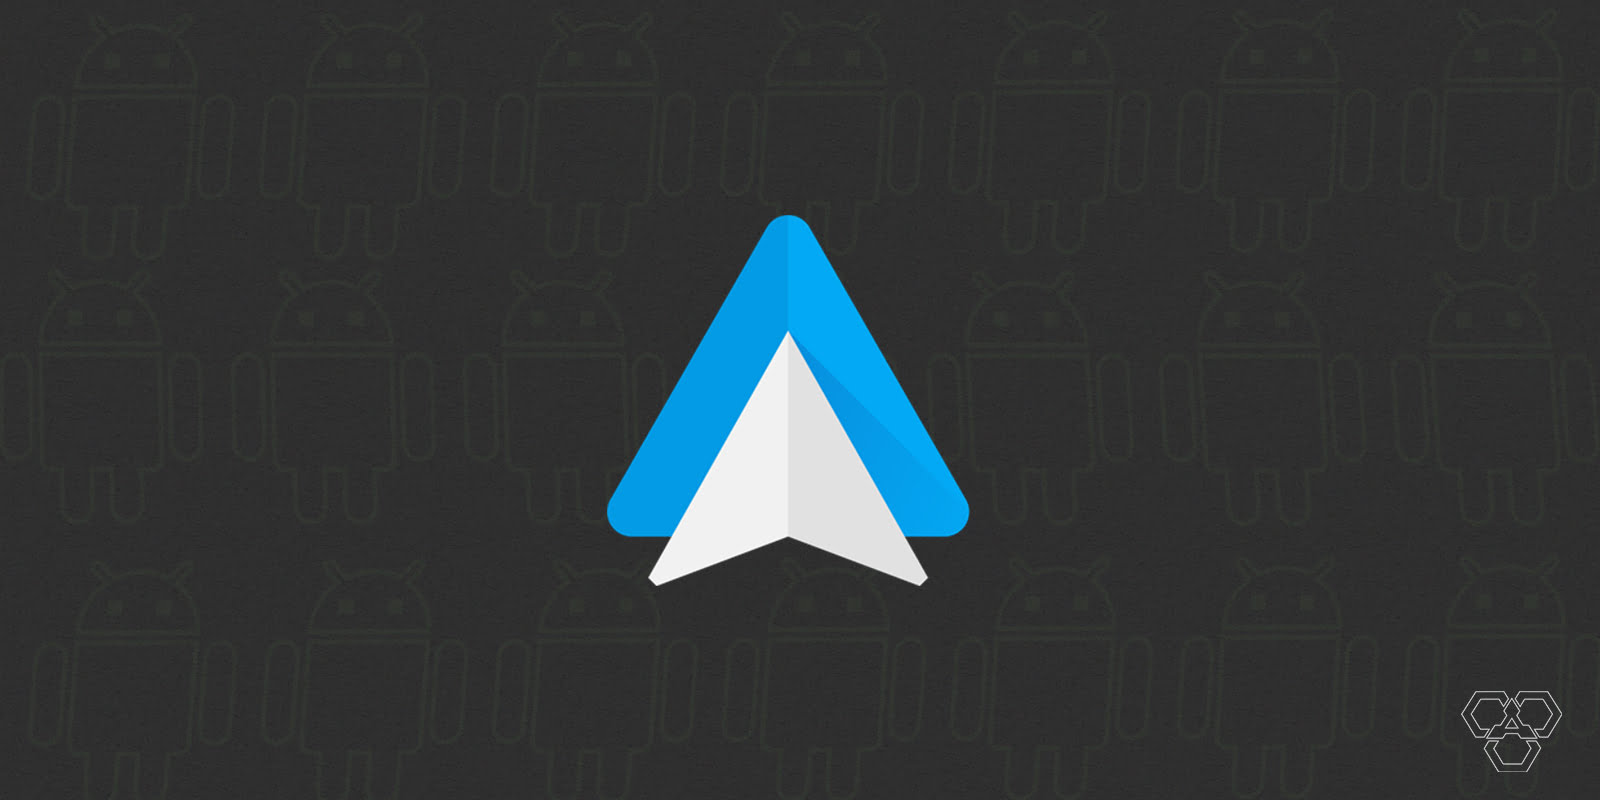 Screenshot of logo of Android Auto app